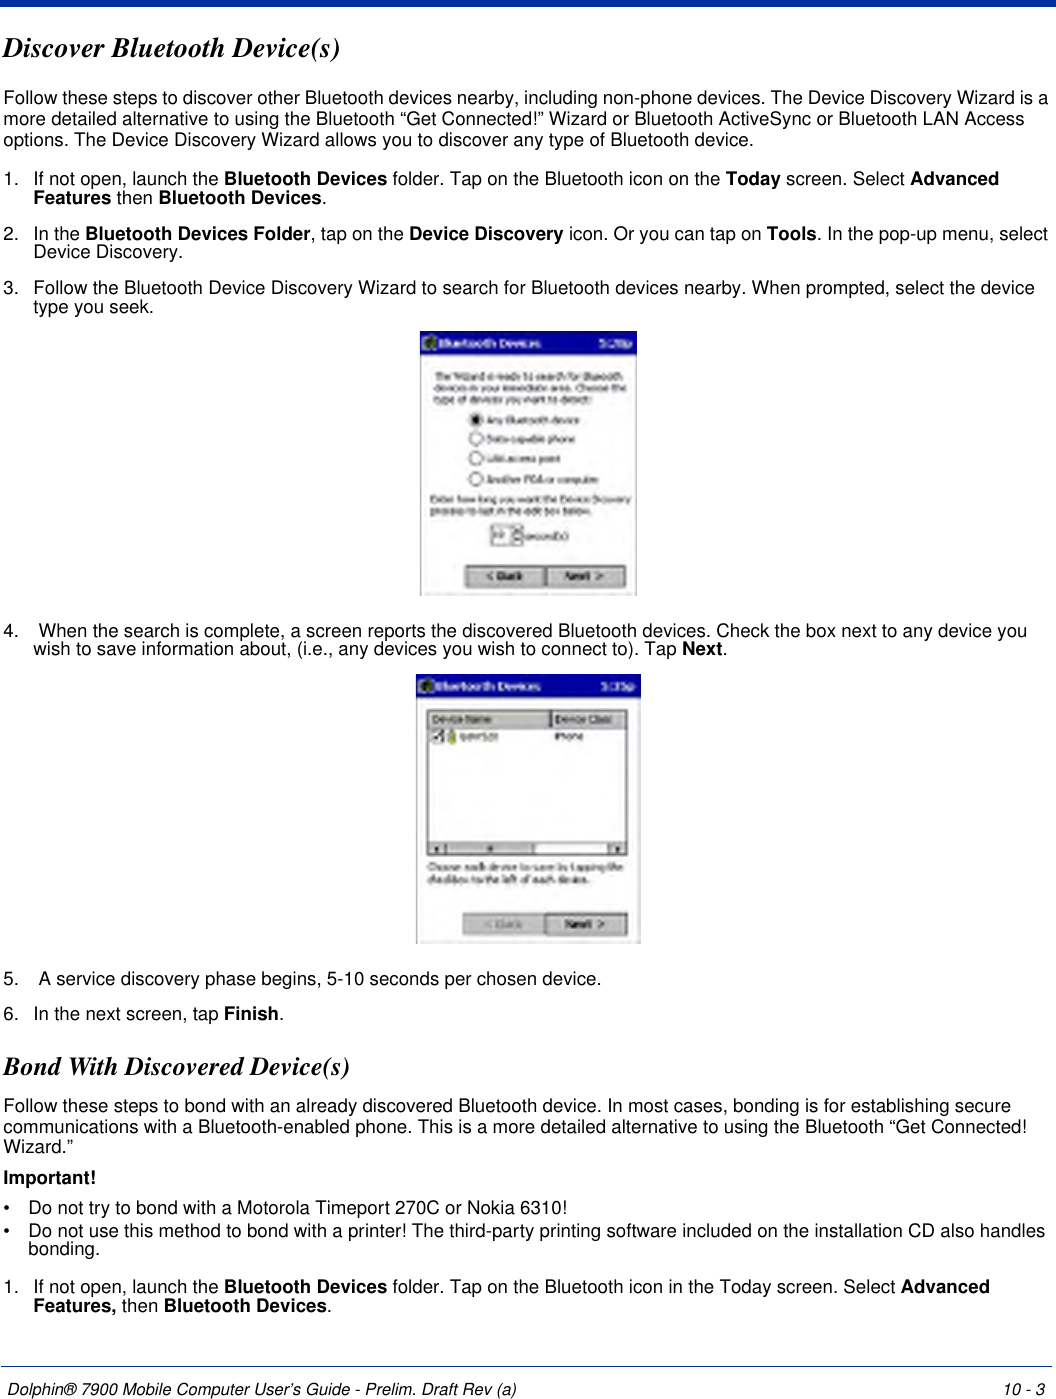 Dolphin® 7900 Mobile Computer User’s Guide - Prelim. Draft Rev (a) 10 - 3Discover Bluetooth Device(s)Follow these steps to discover other Bluetooth devices nearby, including non-phone devices. The Device Discovery Wizard is a more detailed alternative to using the Bluetooth “Get Connected!” Wizard or Bluetooth ActiveSync or Bluetooth LAN Access options. The Device Discovery Wizard allows you to discover any type of Bluetooth device.1. If not open, launch the Bluetooth Devices folder. Tap on the Bluetooth icon on the Today screen. Select Advanced Features then Bluetooth Devices.2. In the Bluetooth Devices Folder, tap on the Device Discovery icon. Or you can tap on Tools. In the pop-up menu, select Device Discovery.3. Follow the Bluetooth Device Discovery Wizard to search for Bluetooth devices nearby. When prompted, select the device type you seek.4.  When the search is complete, a screen reports the discovered Bluetooth devices. Check the box next to any device you wish to save information about, (i.e., any devices you wish to connect to). Tap Next.5.  A service discovery phase begins, 5-10 seconds per chosen device.6. In the next screen, tap Finish.Bond With Discovered Device(s)Follow these steps to bond with an already discovered Bluetooth device. In most cases, bonding is for establishing secure communications with a Bluetooth-enabled phone. This is a more detailed alternative to using the Bluetooth “Get Connected! Wizard.”Important!•           Do not try to bond with a Motorola Timeport 270C or Nokia 6310!•           Do not use this method to bond with a printer! The third-party printing software included on the installation CD also handles bonding.1. If not open, launch the Bluetooth Devices folder. Tap on the Bluetooth icon in the Today screen. Select Advanced Features, then Bluetooth Devices.